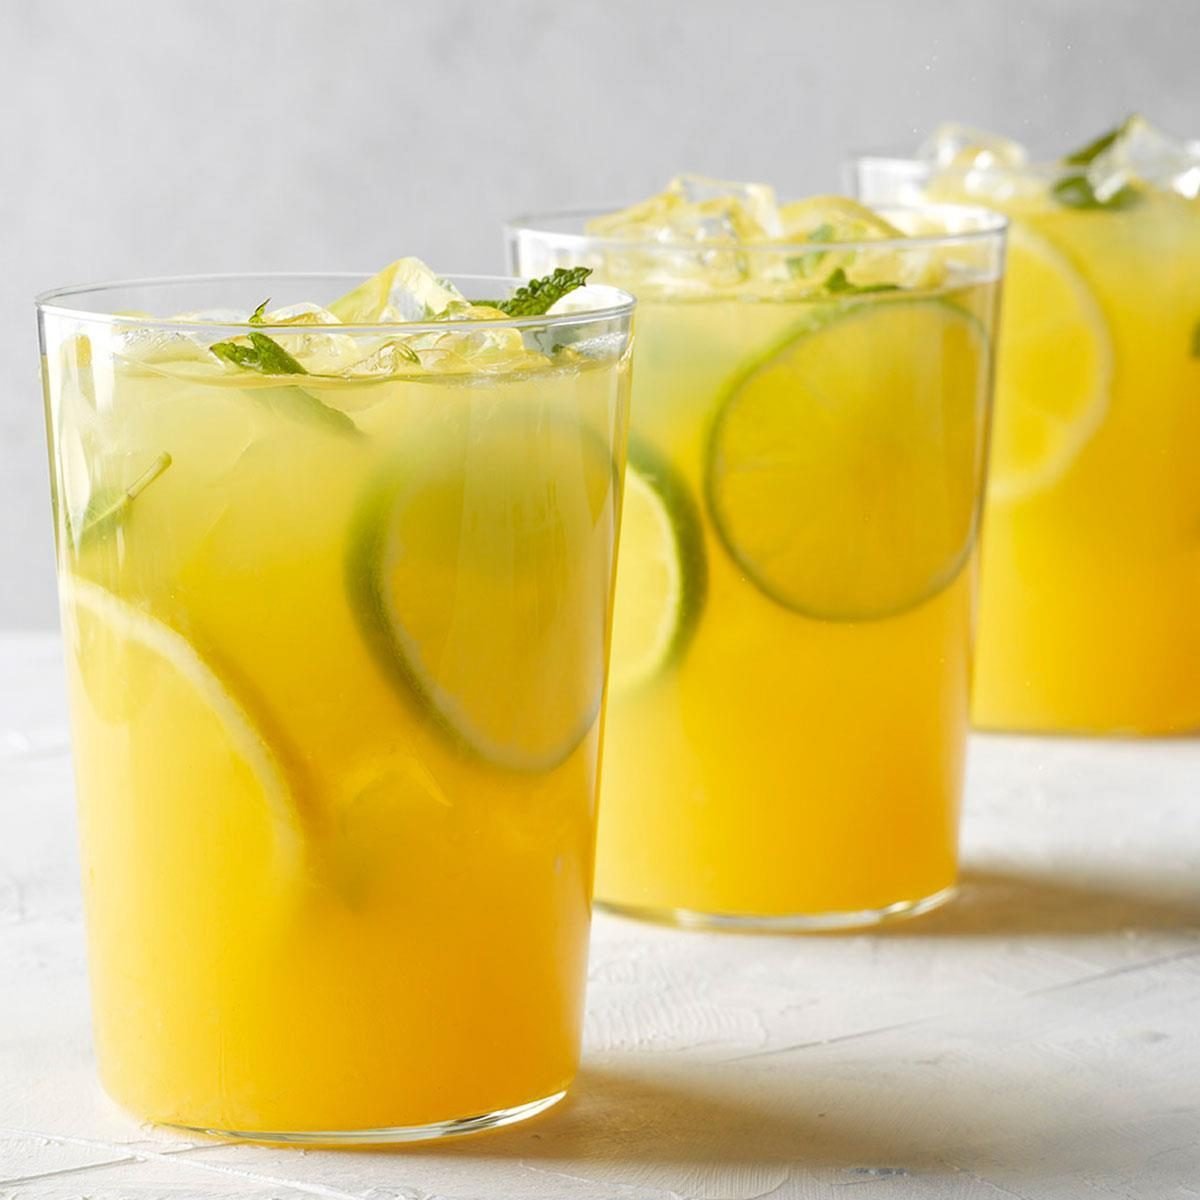 27 Tequila Drink Recipes That'll Make Summer Even More Relaxing